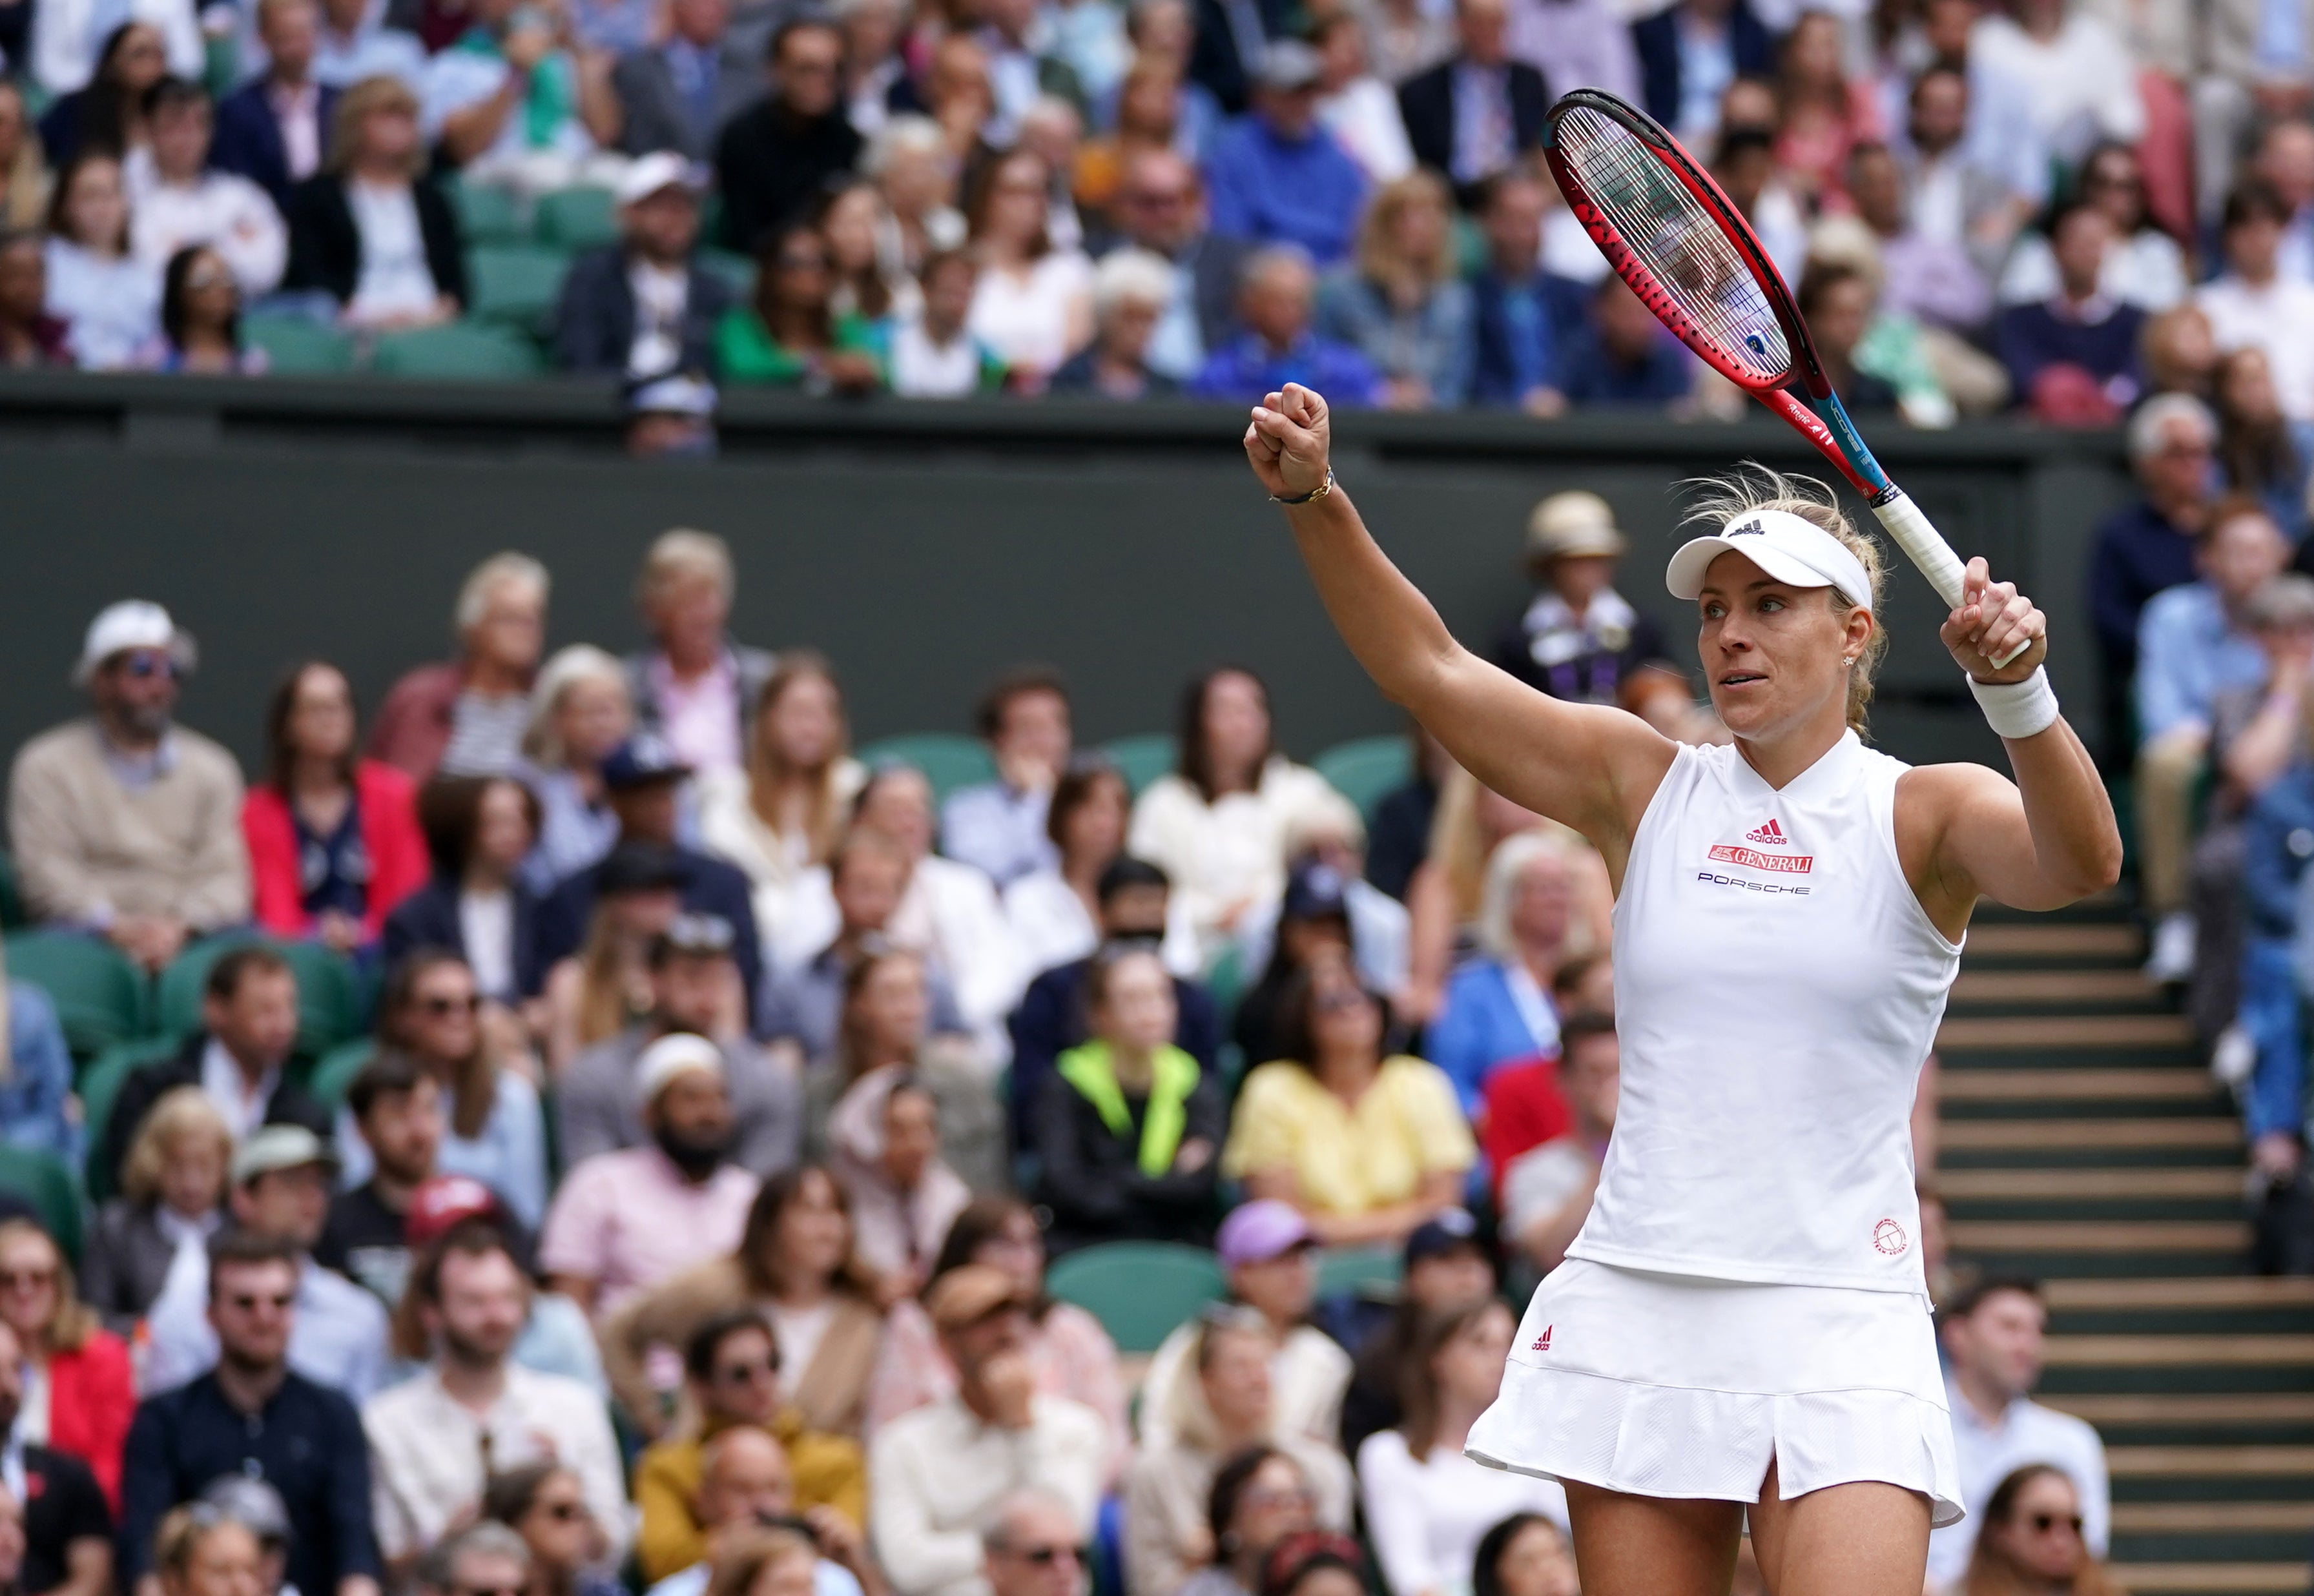 Angelique Kerber looked back to her best as she took out Coco Gauff on Centre Court